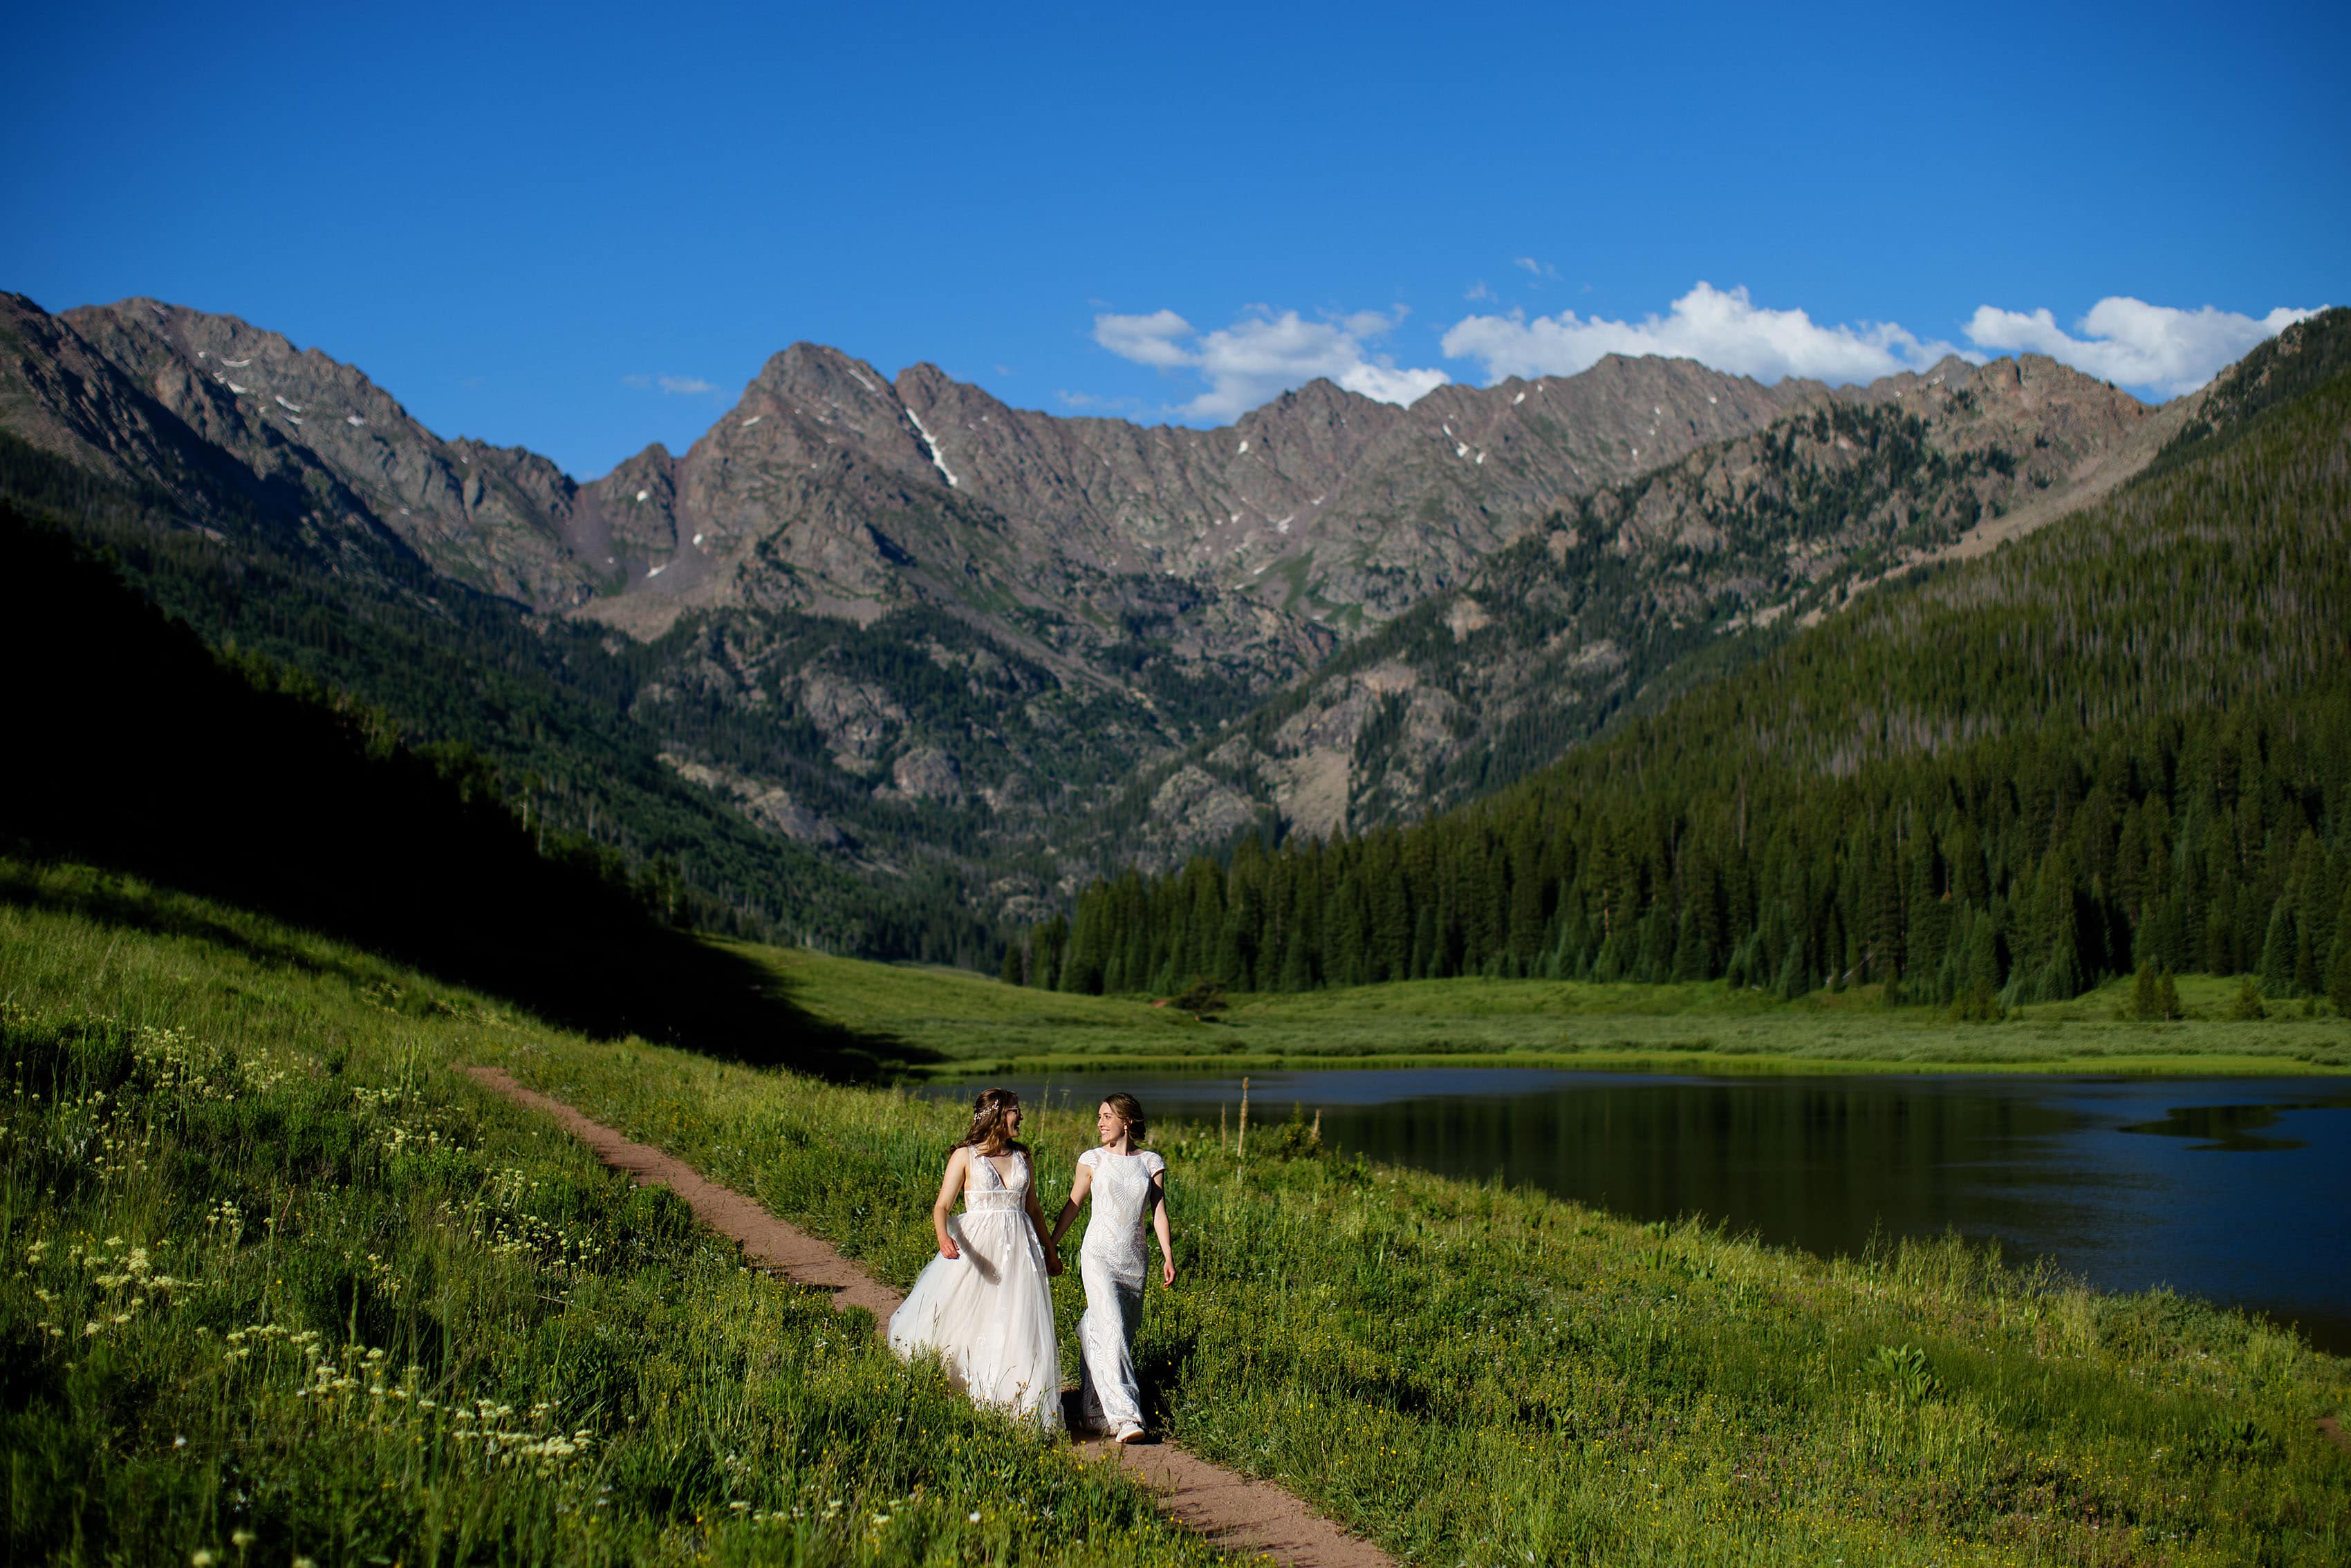 The brides walk together on the trail at Piney River Ranch